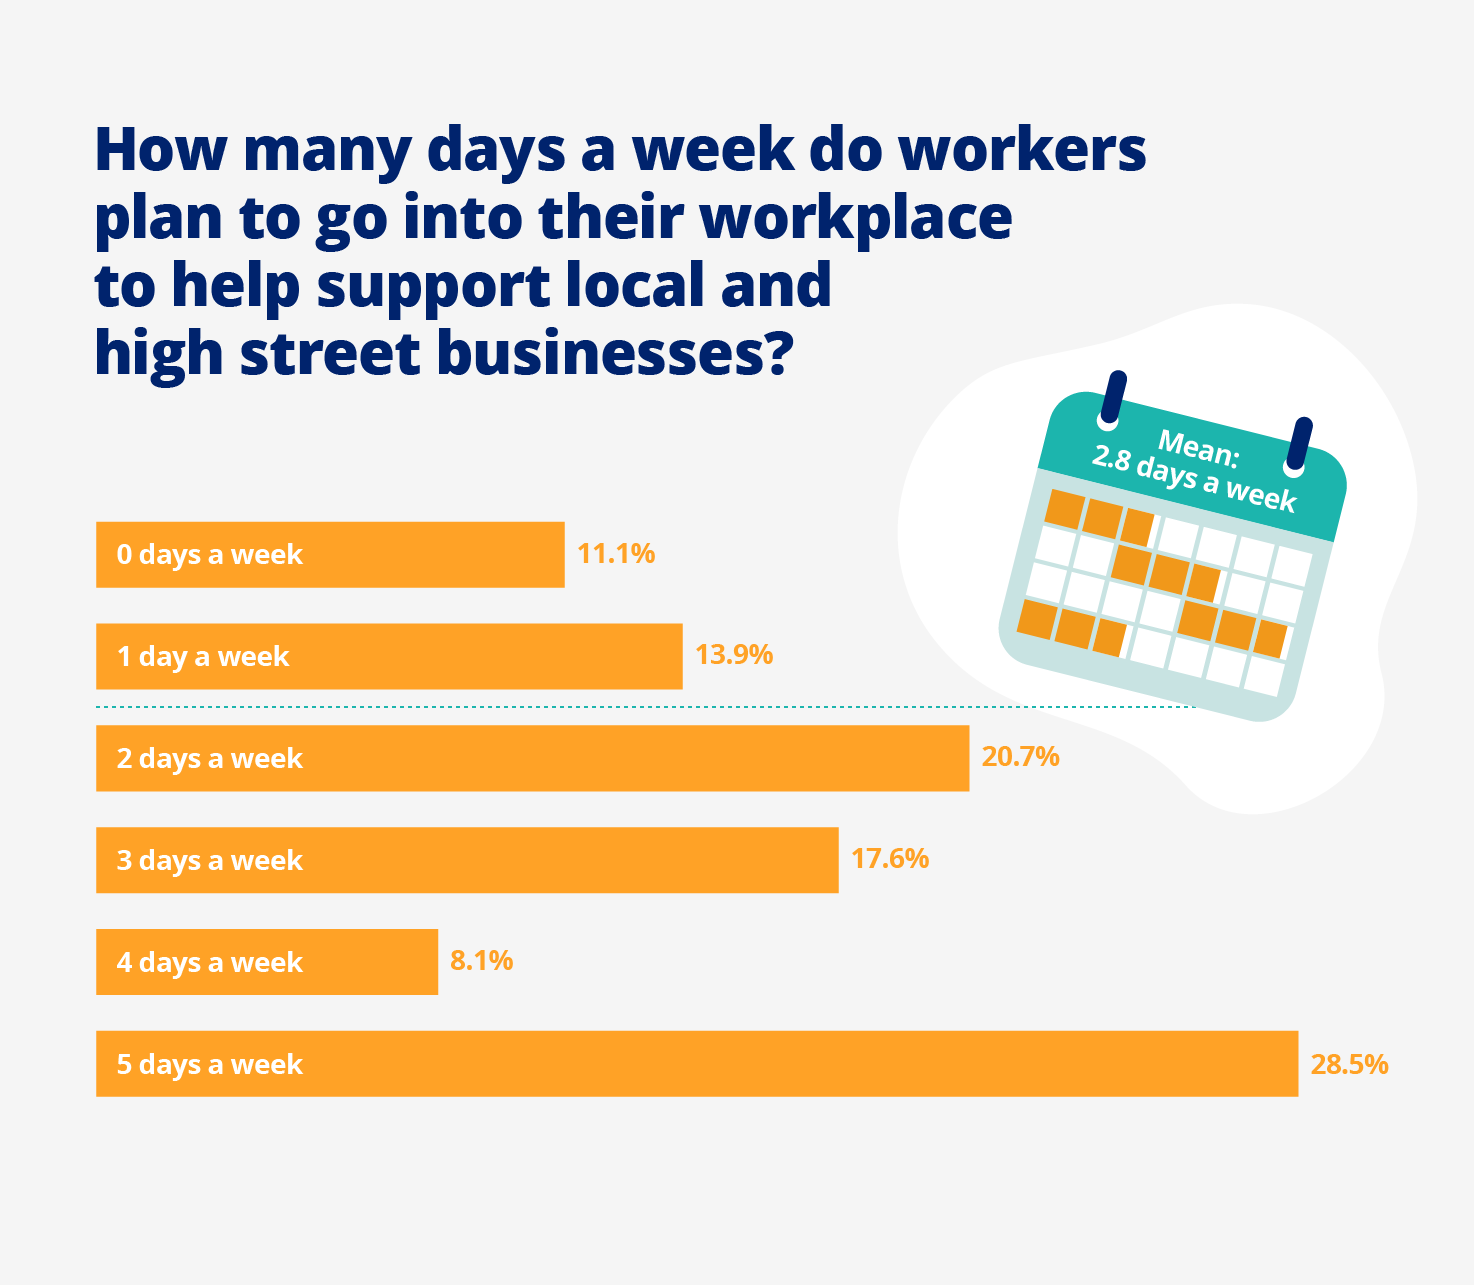 How many days a week do workers plan to go into the office?